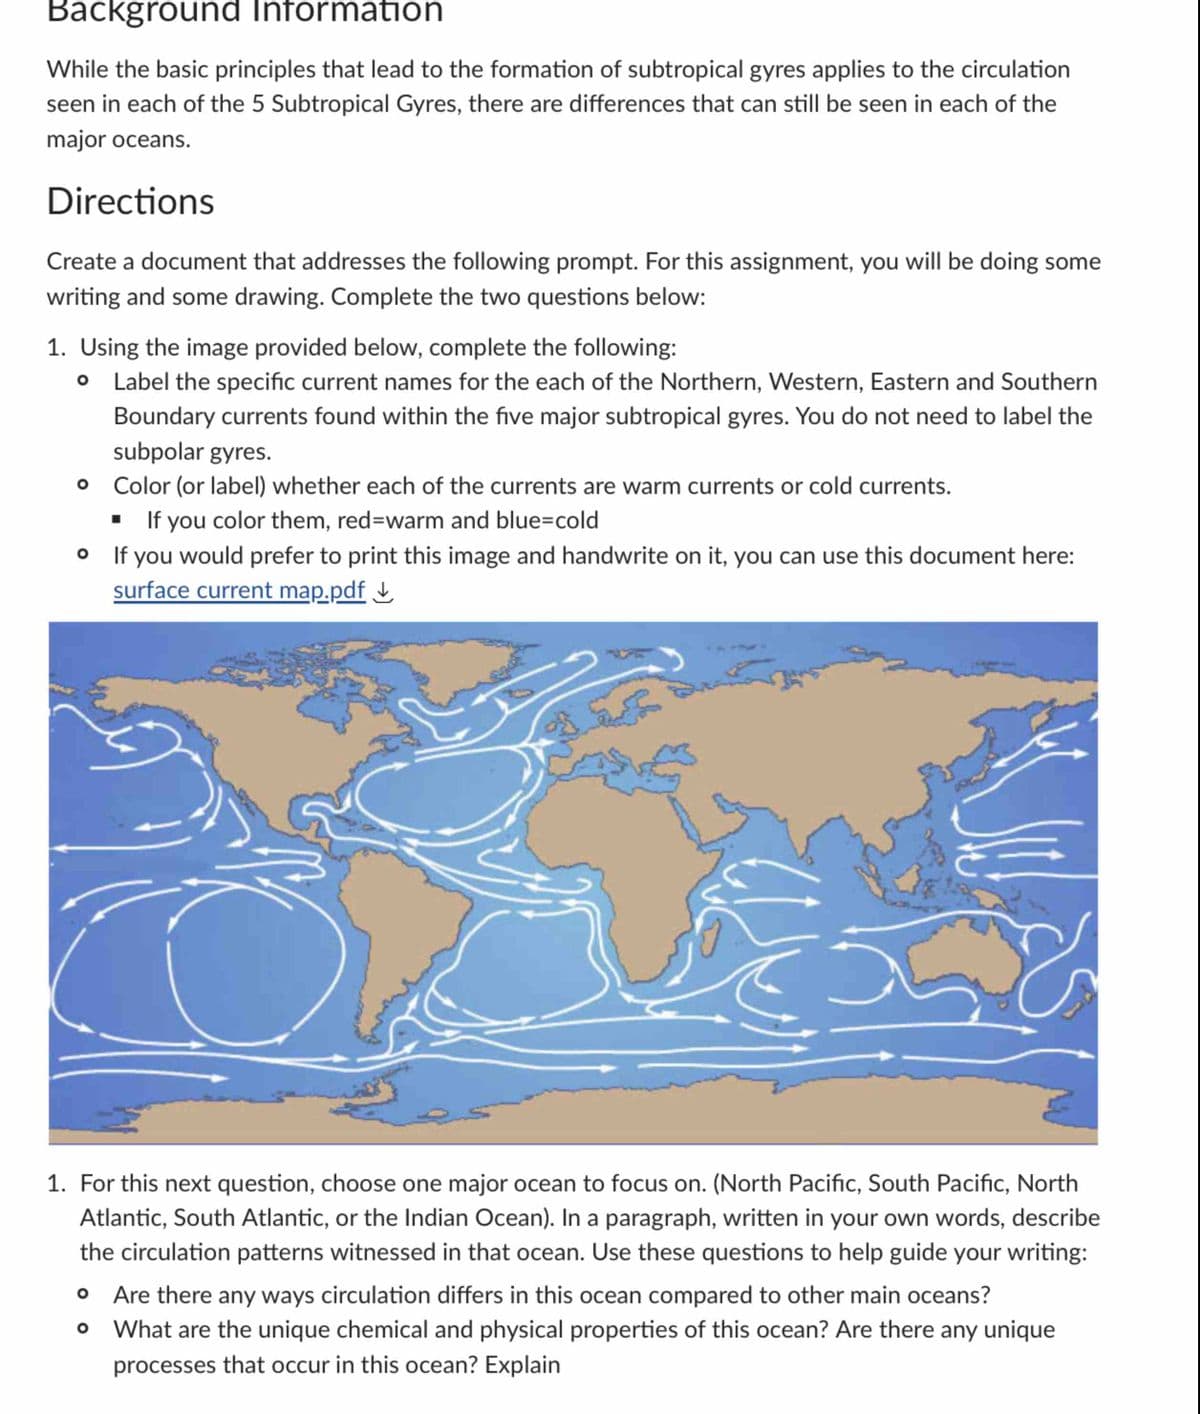 Background Information
While the basic principles that lead to the formation of subtropical gyres applies to the circulation
seen in each of the 5 Subtropical Gyres, there are differences that can still be seen in each of the
major oceans.
Directions
Create a document that addresses the following prompt. For this assignment, you will be doing some
writing and some drawing. Complete the two questions below:
1. Using the image provided below, complete the following:
Label the specific current names for the each of the Northern, Western, Eastern and Southern
Boundary currents found within the five major subtropical gyres. You do not need to label the
subpolar gyres.
Color (or label) whether each of the currents are warm currents or cold currents.
■ If you color them, red-warm and blue-cold
• If you would prefer to print this image and handwrite on it, you can use this document here:
surface current map.pdf
1. For this next question, choose one major ocean to focus on. (North Pacific, South Pacific, North
Atlantic, South Atlantic, or the Indian Ocean). In a paragraph, written in your own words, describe
the circulation patterns witnessed in that ocean. Use these questions to help guide your writing:
Are there any ways circulation differs in this ocean compared to other main oceans?
° What are the unique chemical and physical properties of this ocean? Are there any unique
processes that occur in this ocean? Explain